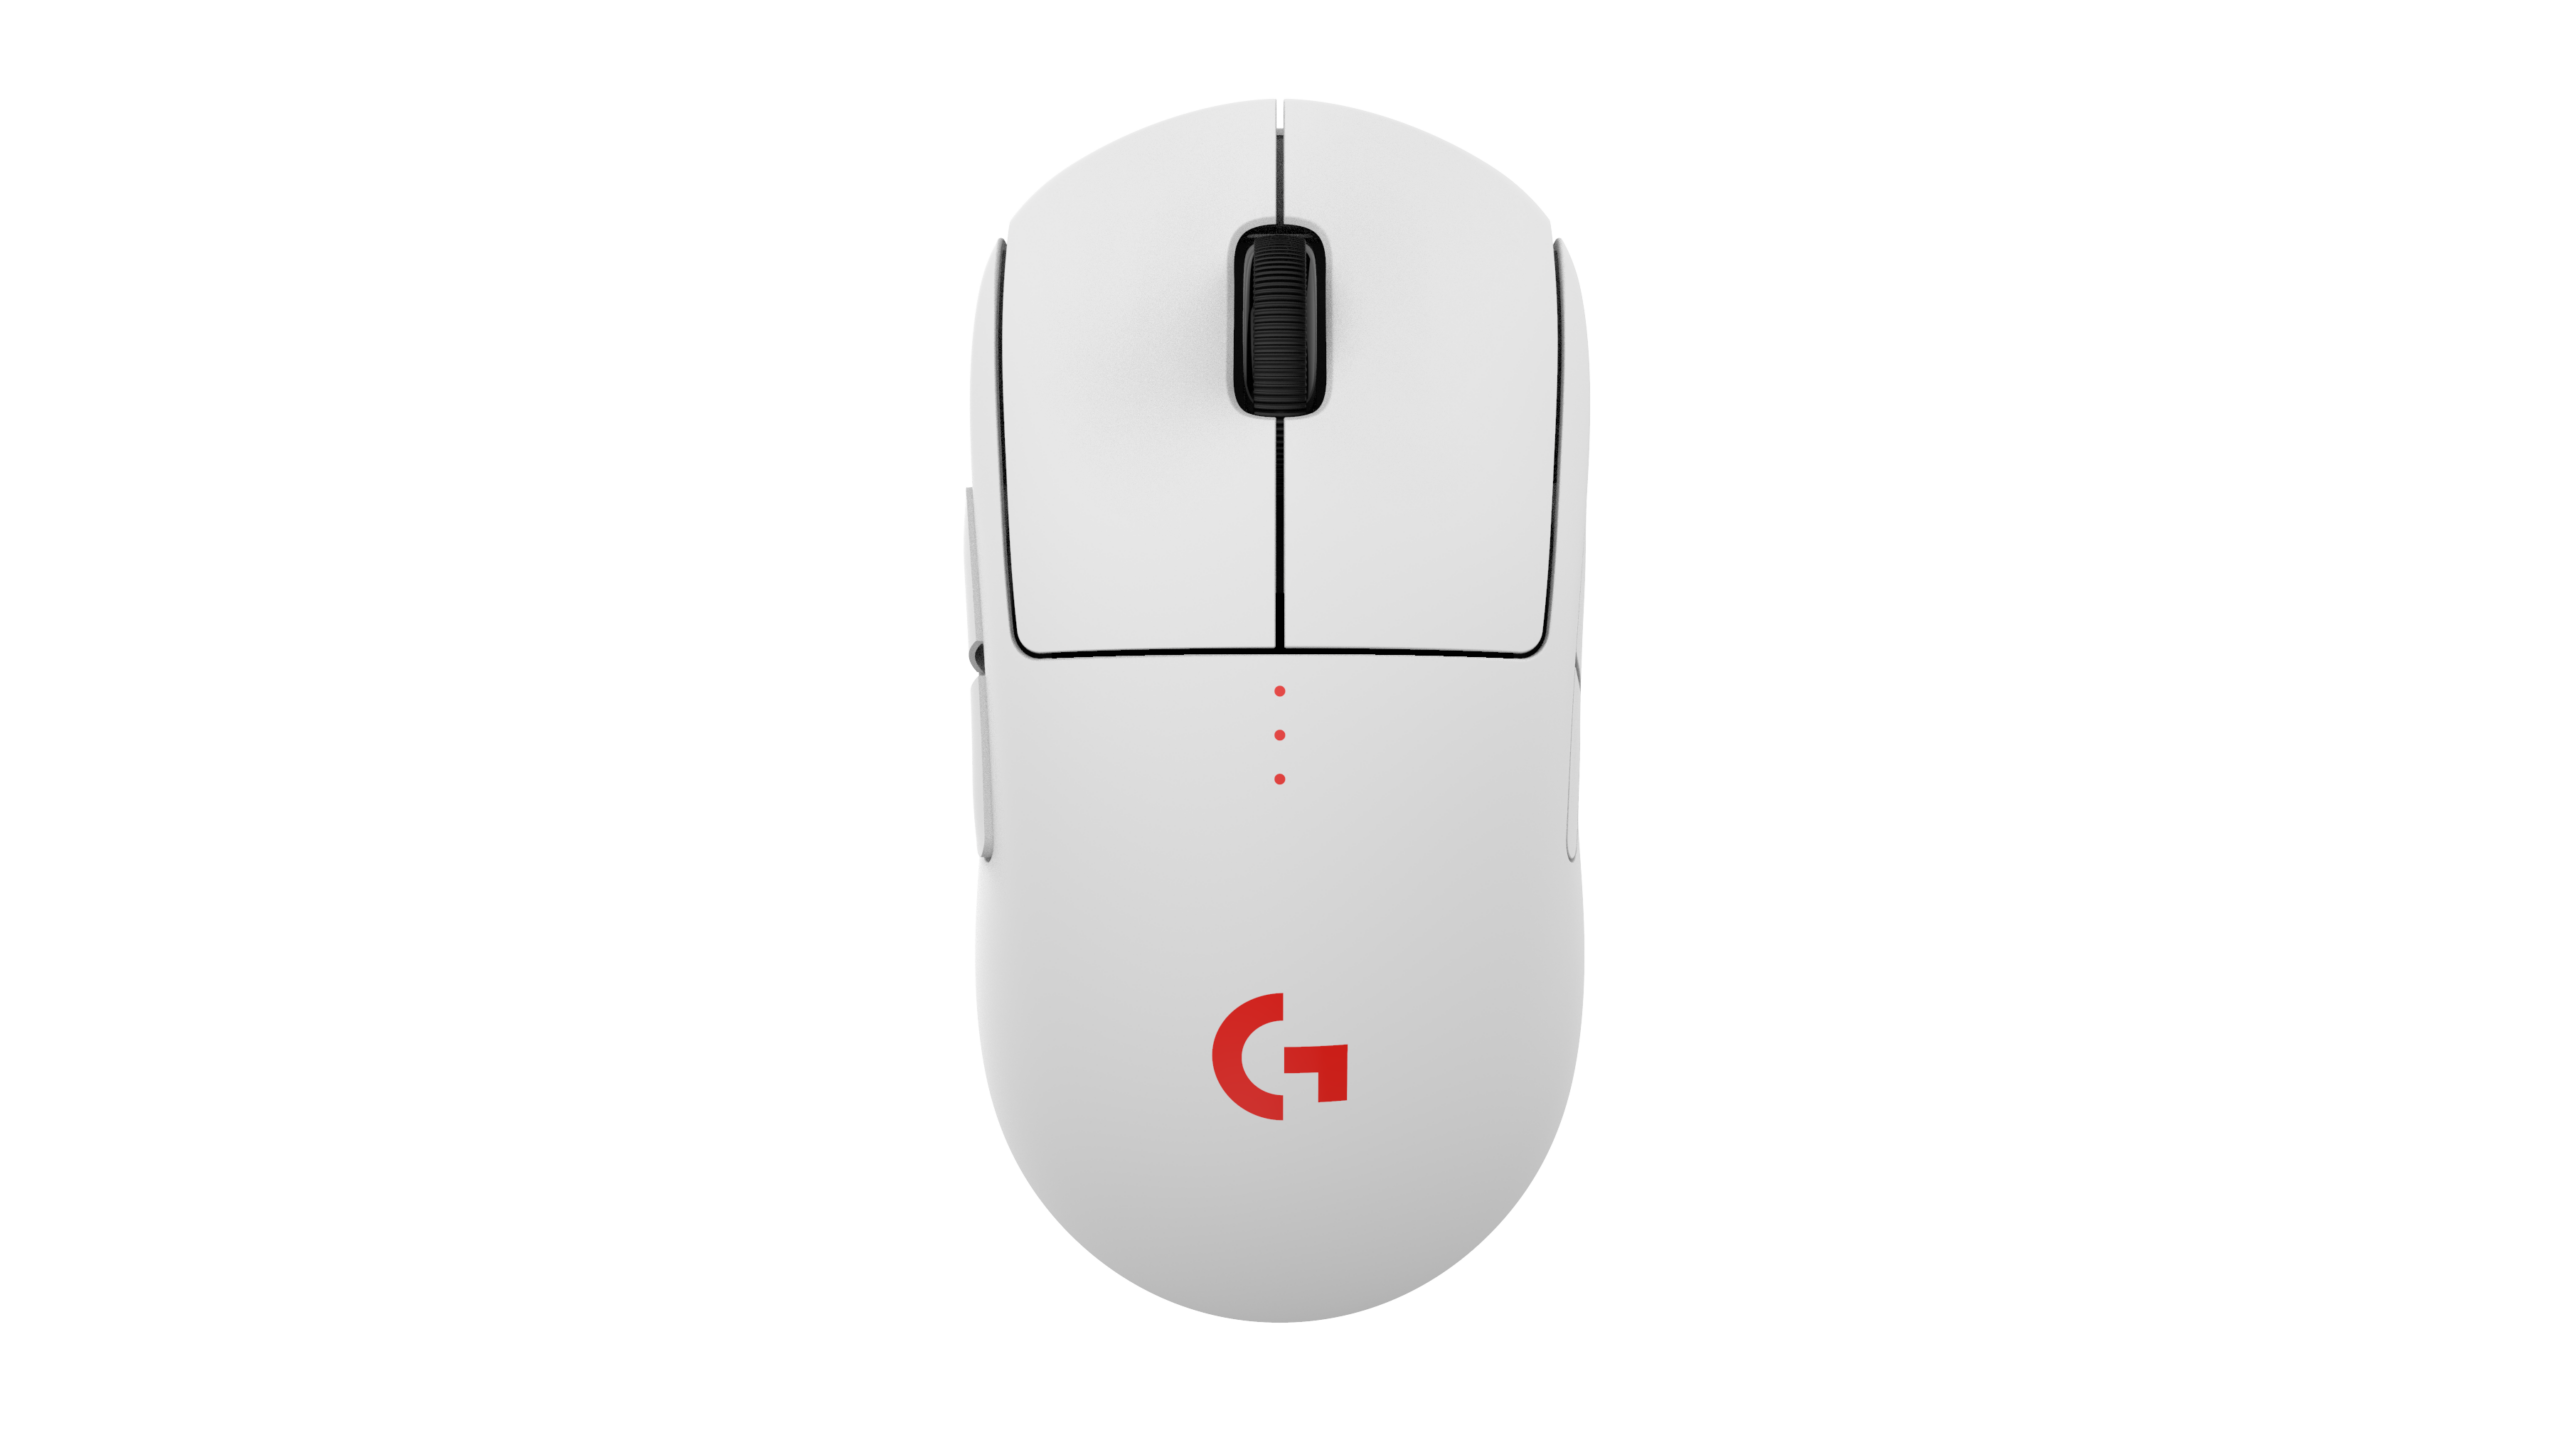 Buy the limited-edition white GHOST Logitech G PRO wireless gaming 